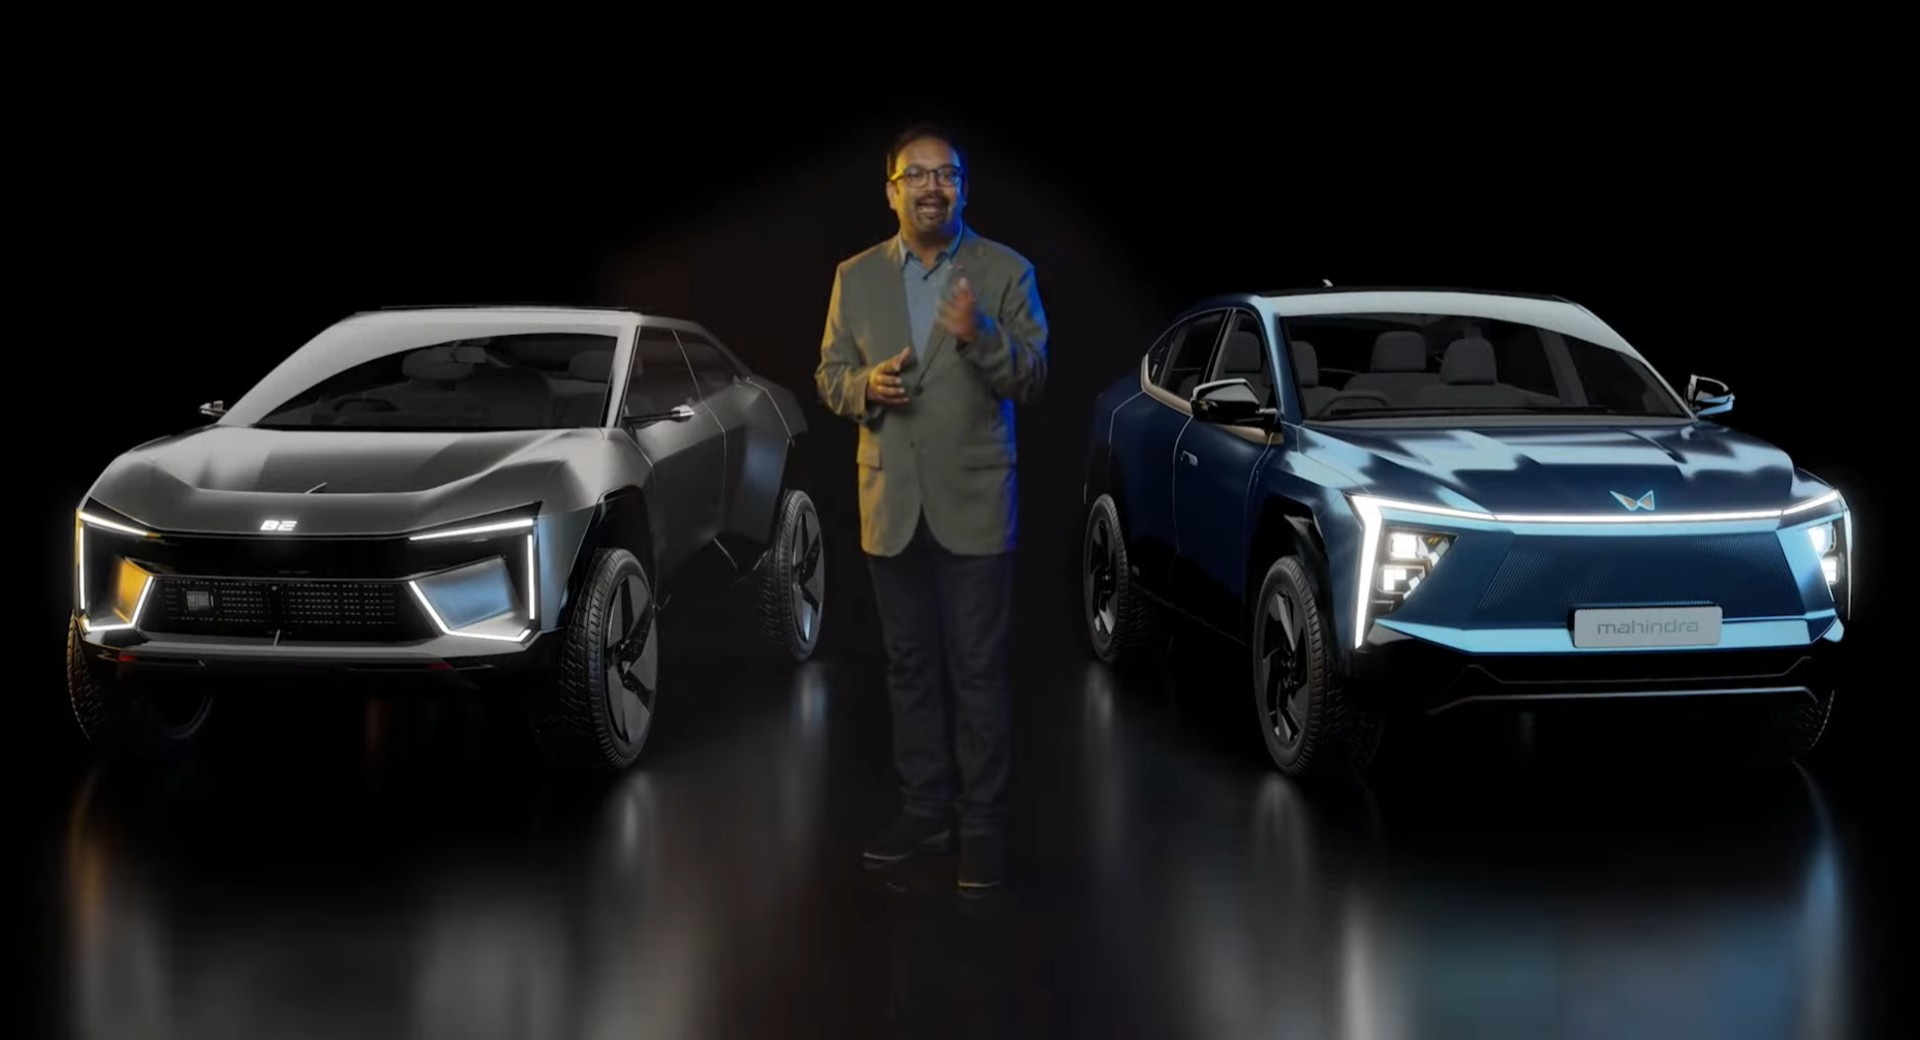 Mahindra BE And XUV Concepts 3 - Auto Recent